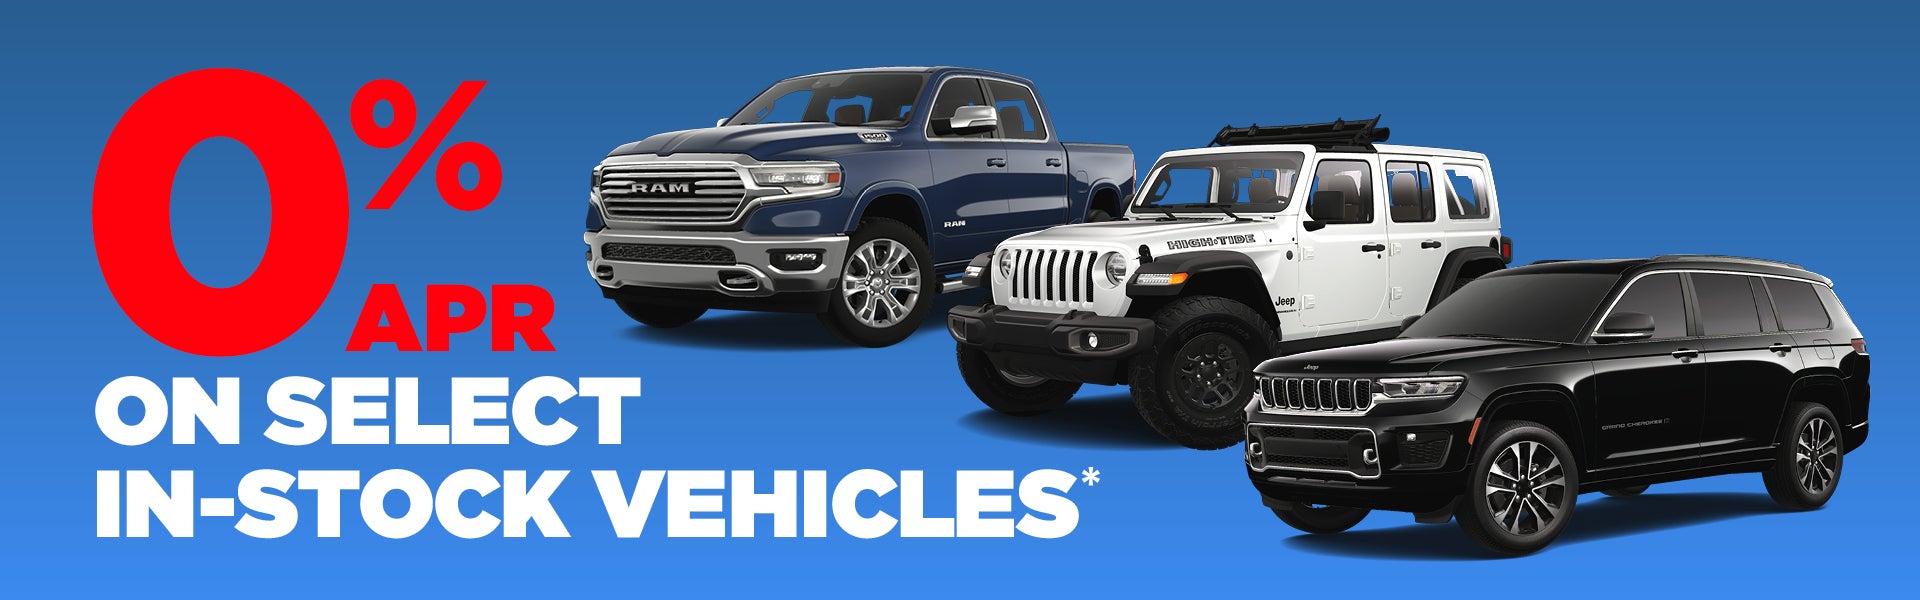 0% APR on select in-stock vehicles 